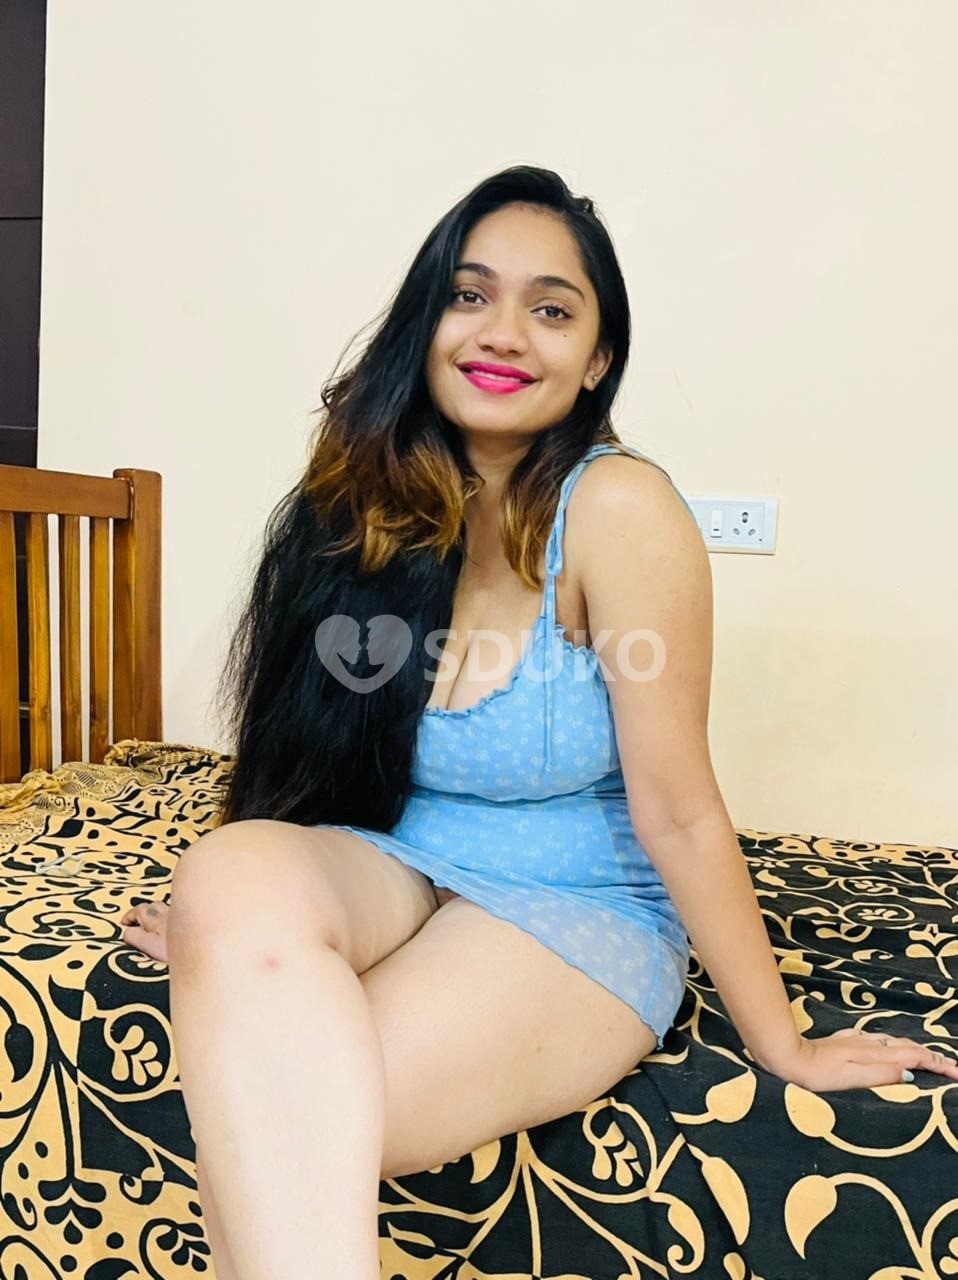 Raebareli ✅ Low price best vip call girls sarvice Full saf and secure in call out call available genuine service